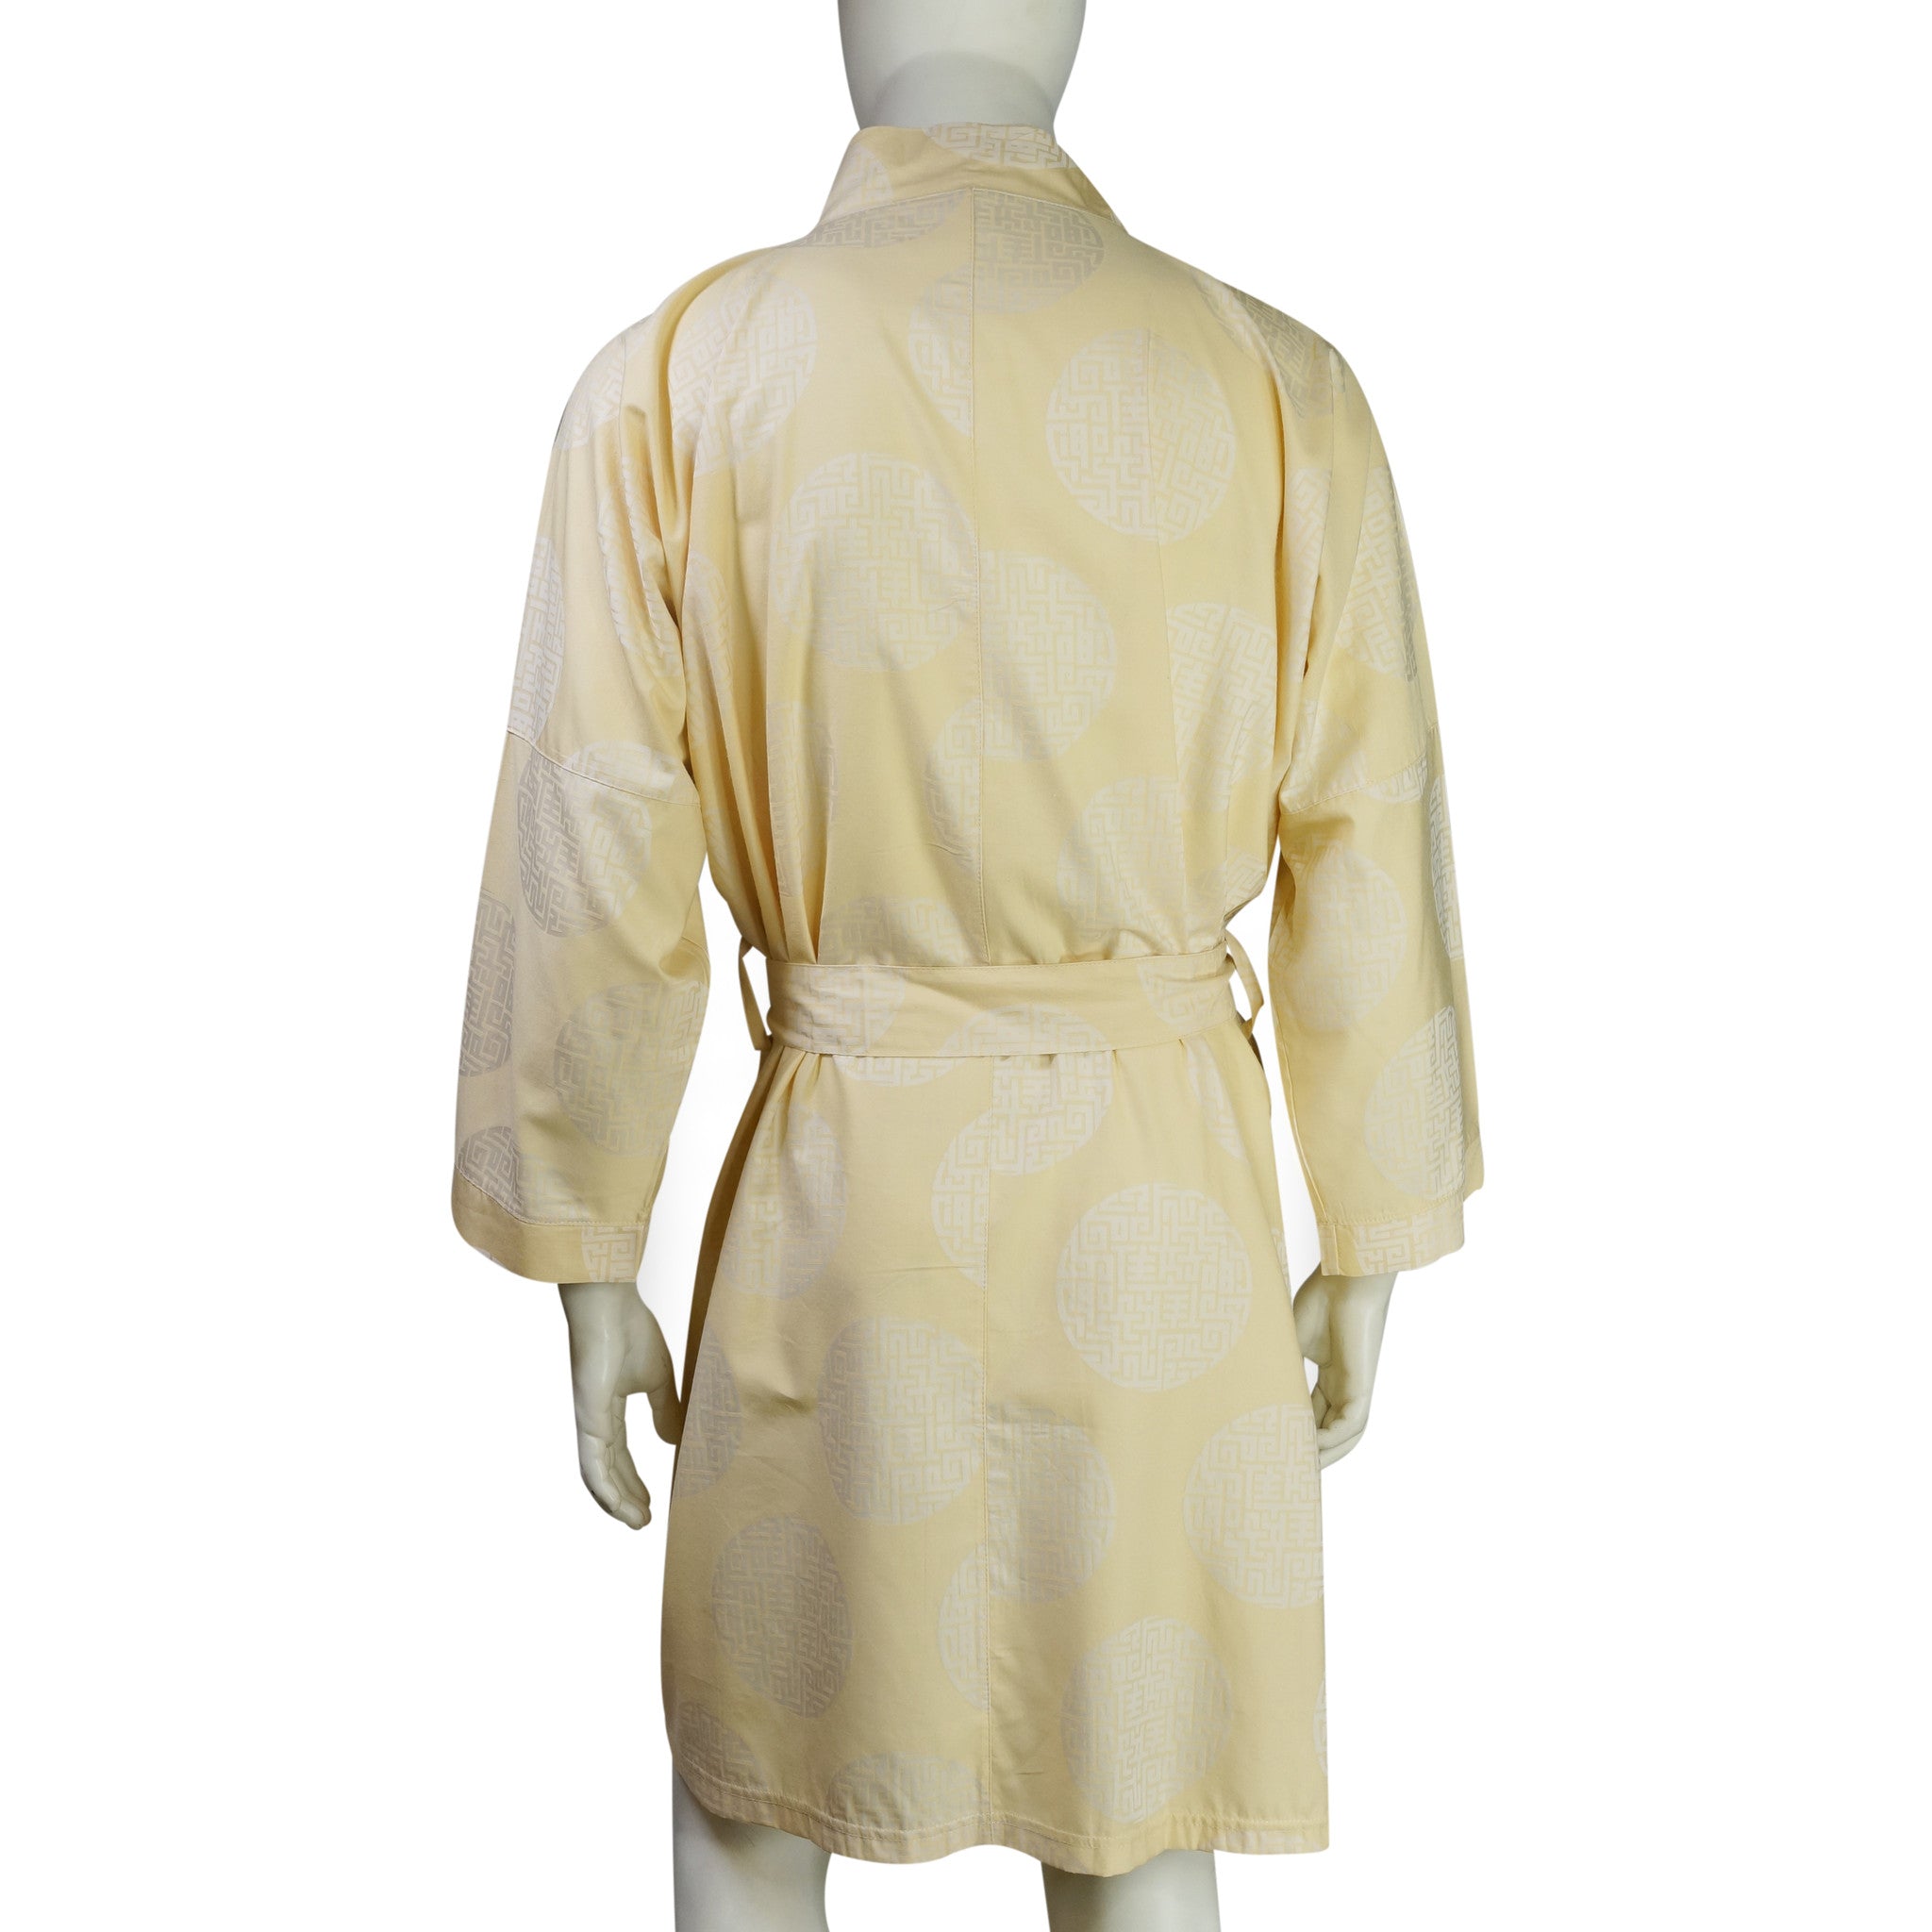 Chinese Brocade dressing gown (yellow)